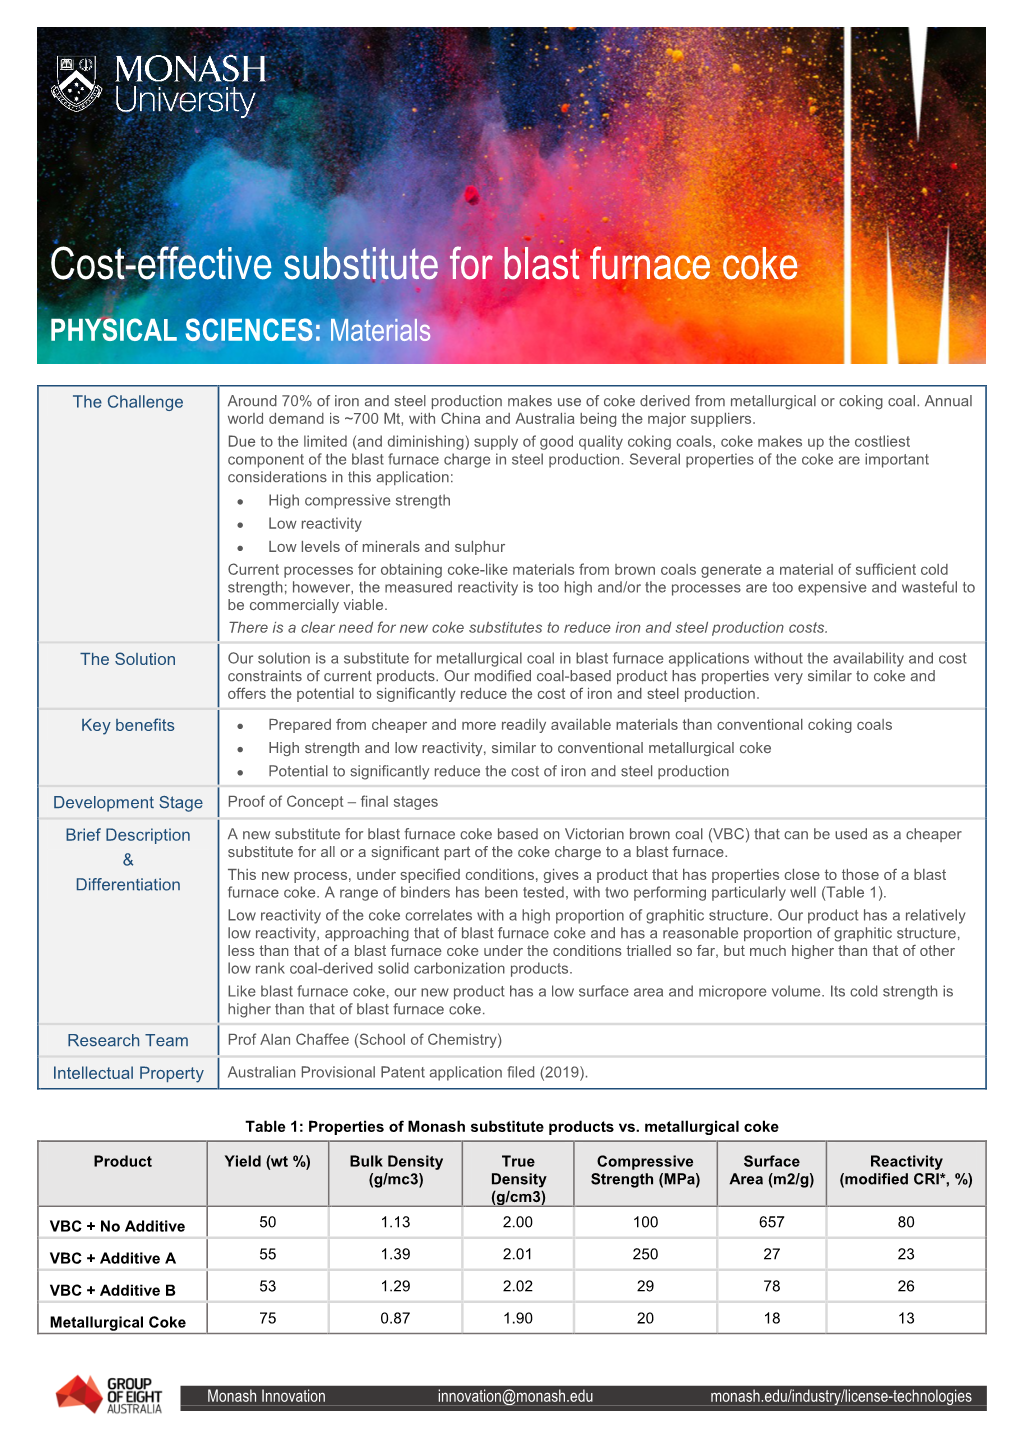 Cost-Effective Substitute for Blast Furnace Coke